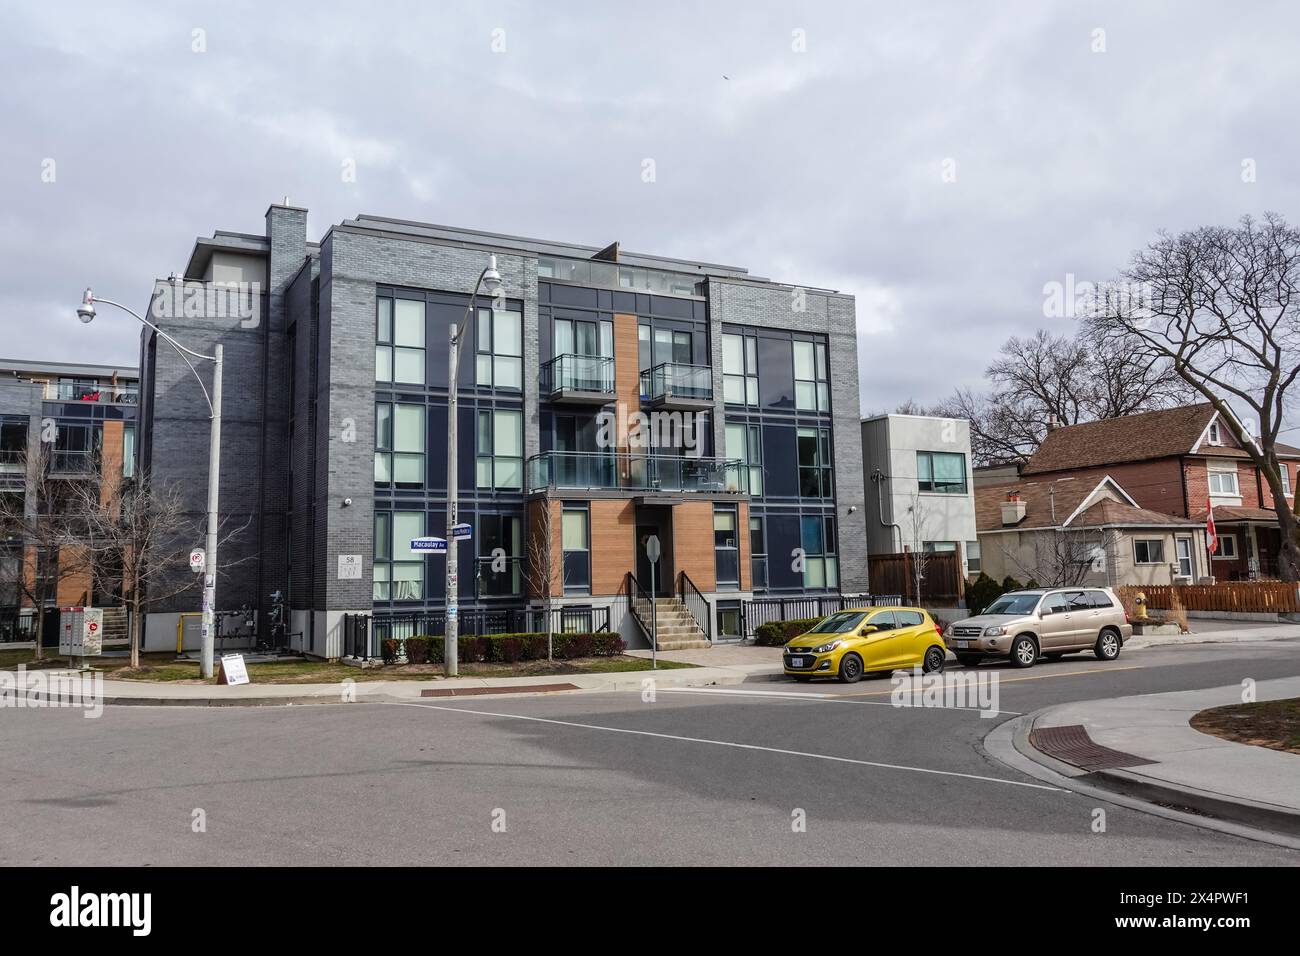 A modern and new residential 3 story high building with multiple rental units, in the Junction area of Toronto Ontario Canada Stock Photo